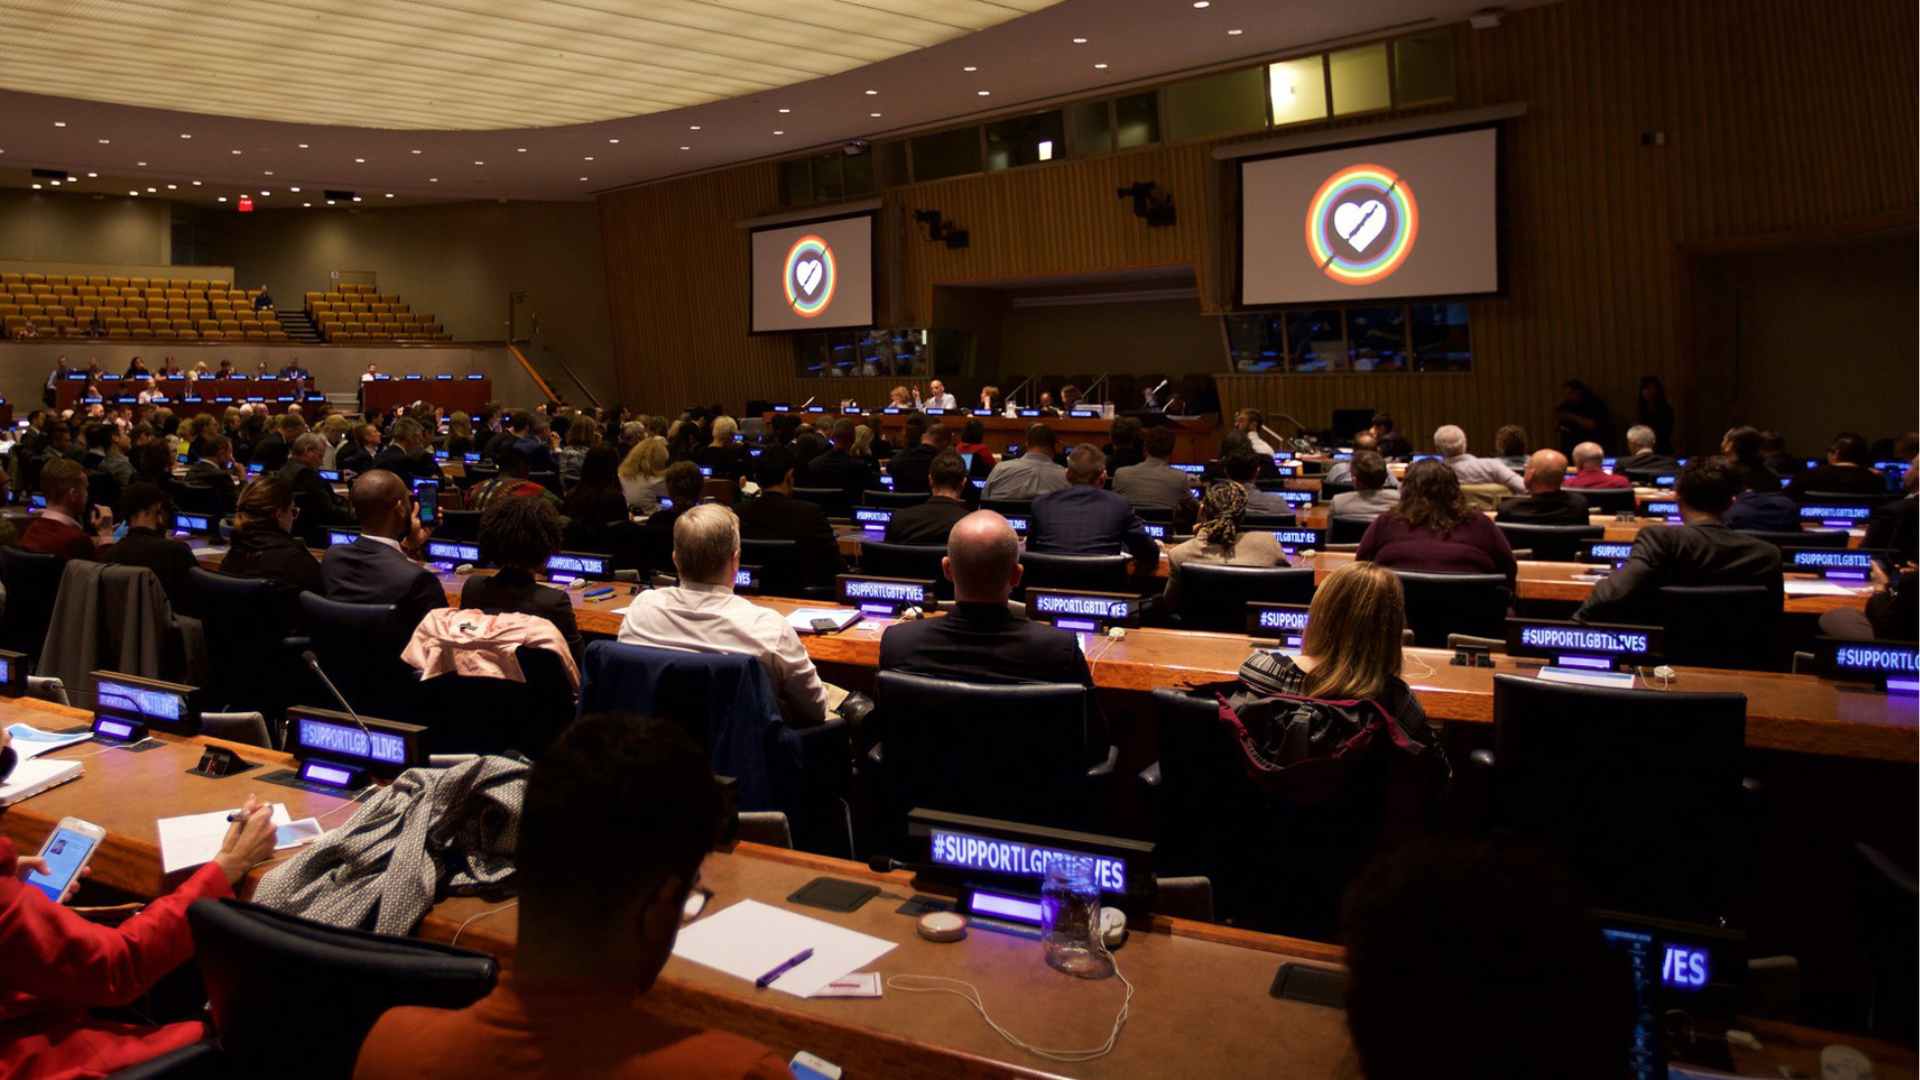 Outright International delivering a presentation at the UN General Assembly in 2018.